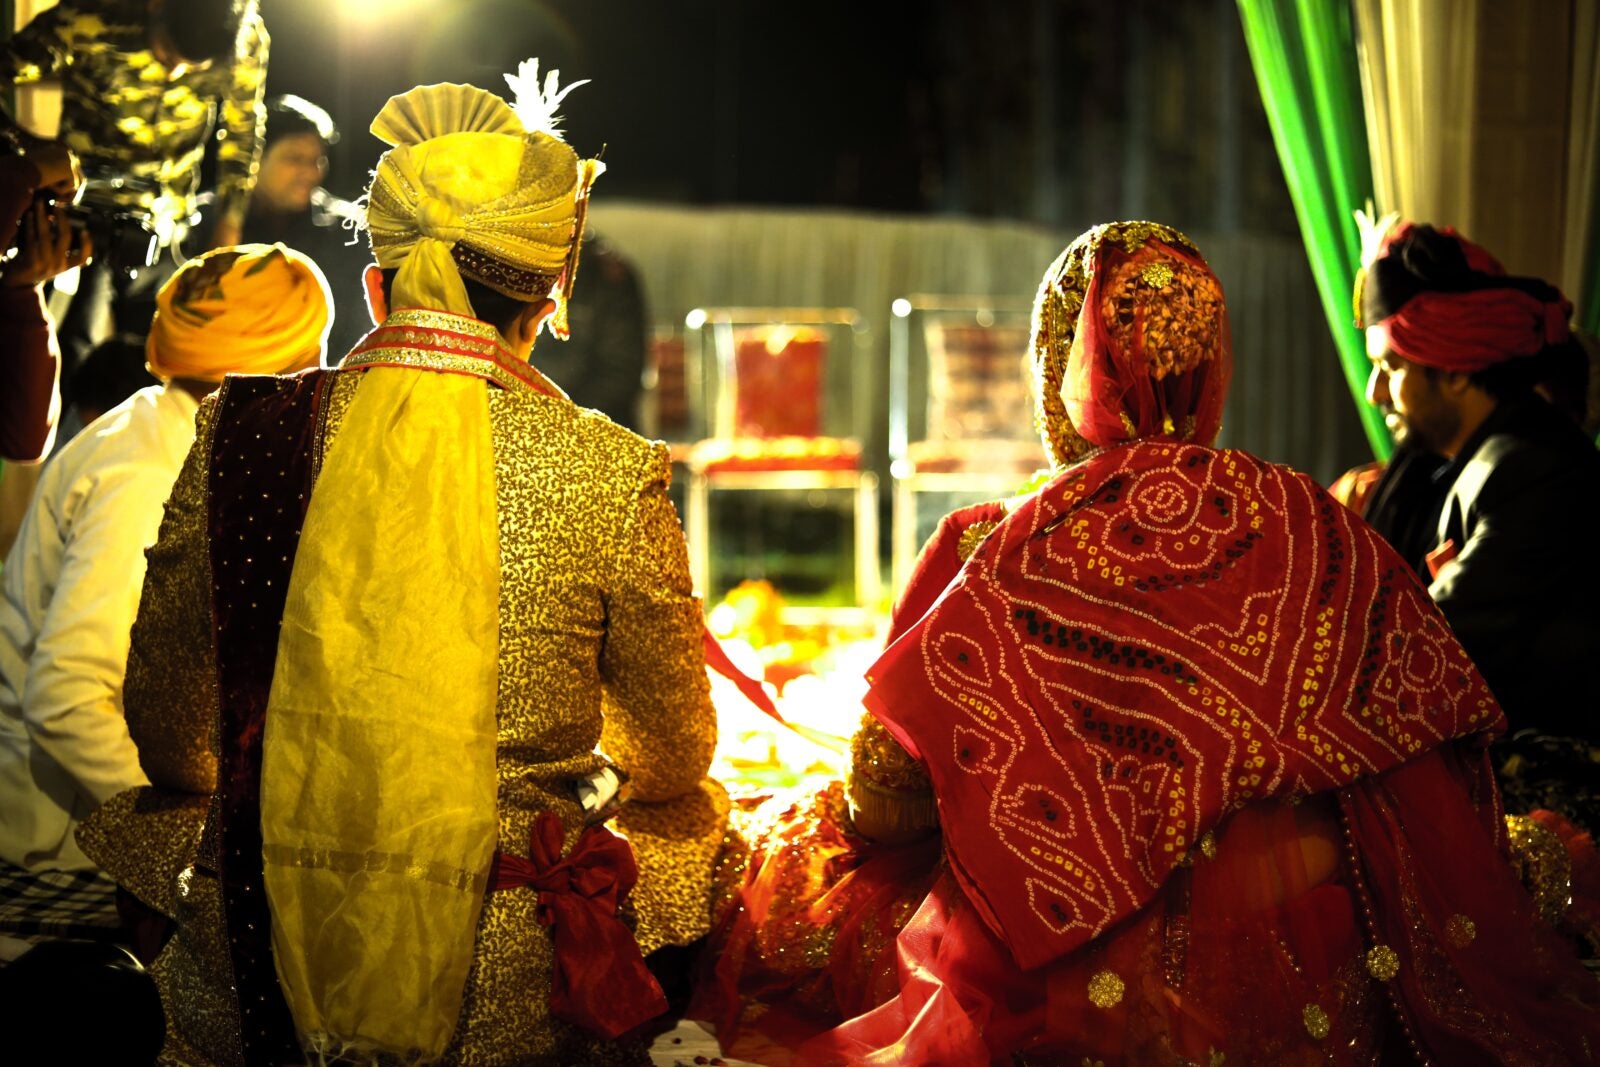 backshot of an Indian couple getting married.